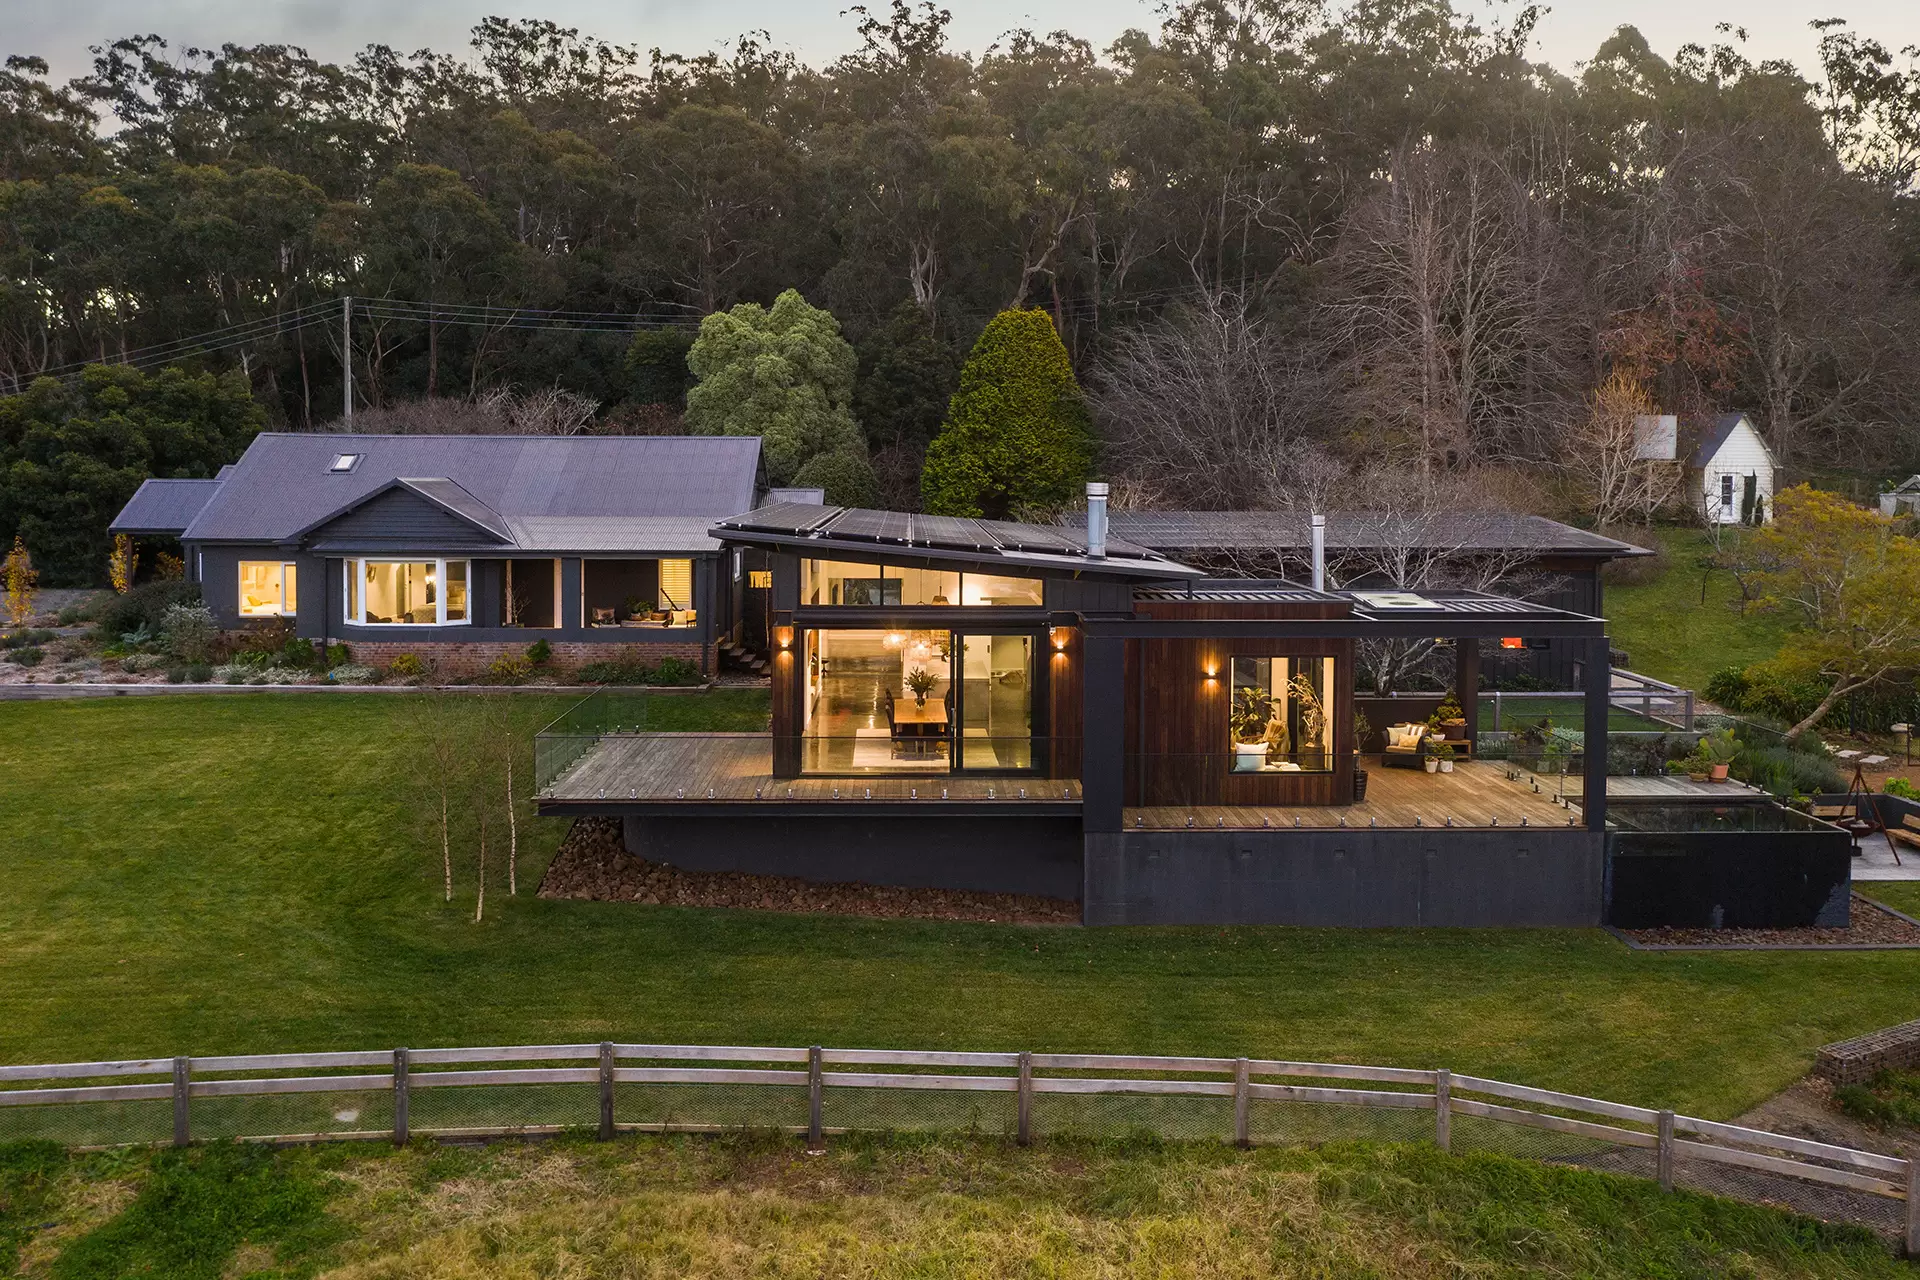 Photo #1: 110 Oxleys Hill Road, Bowral - Sold by Drew Lindsay Sotheby's International Realty